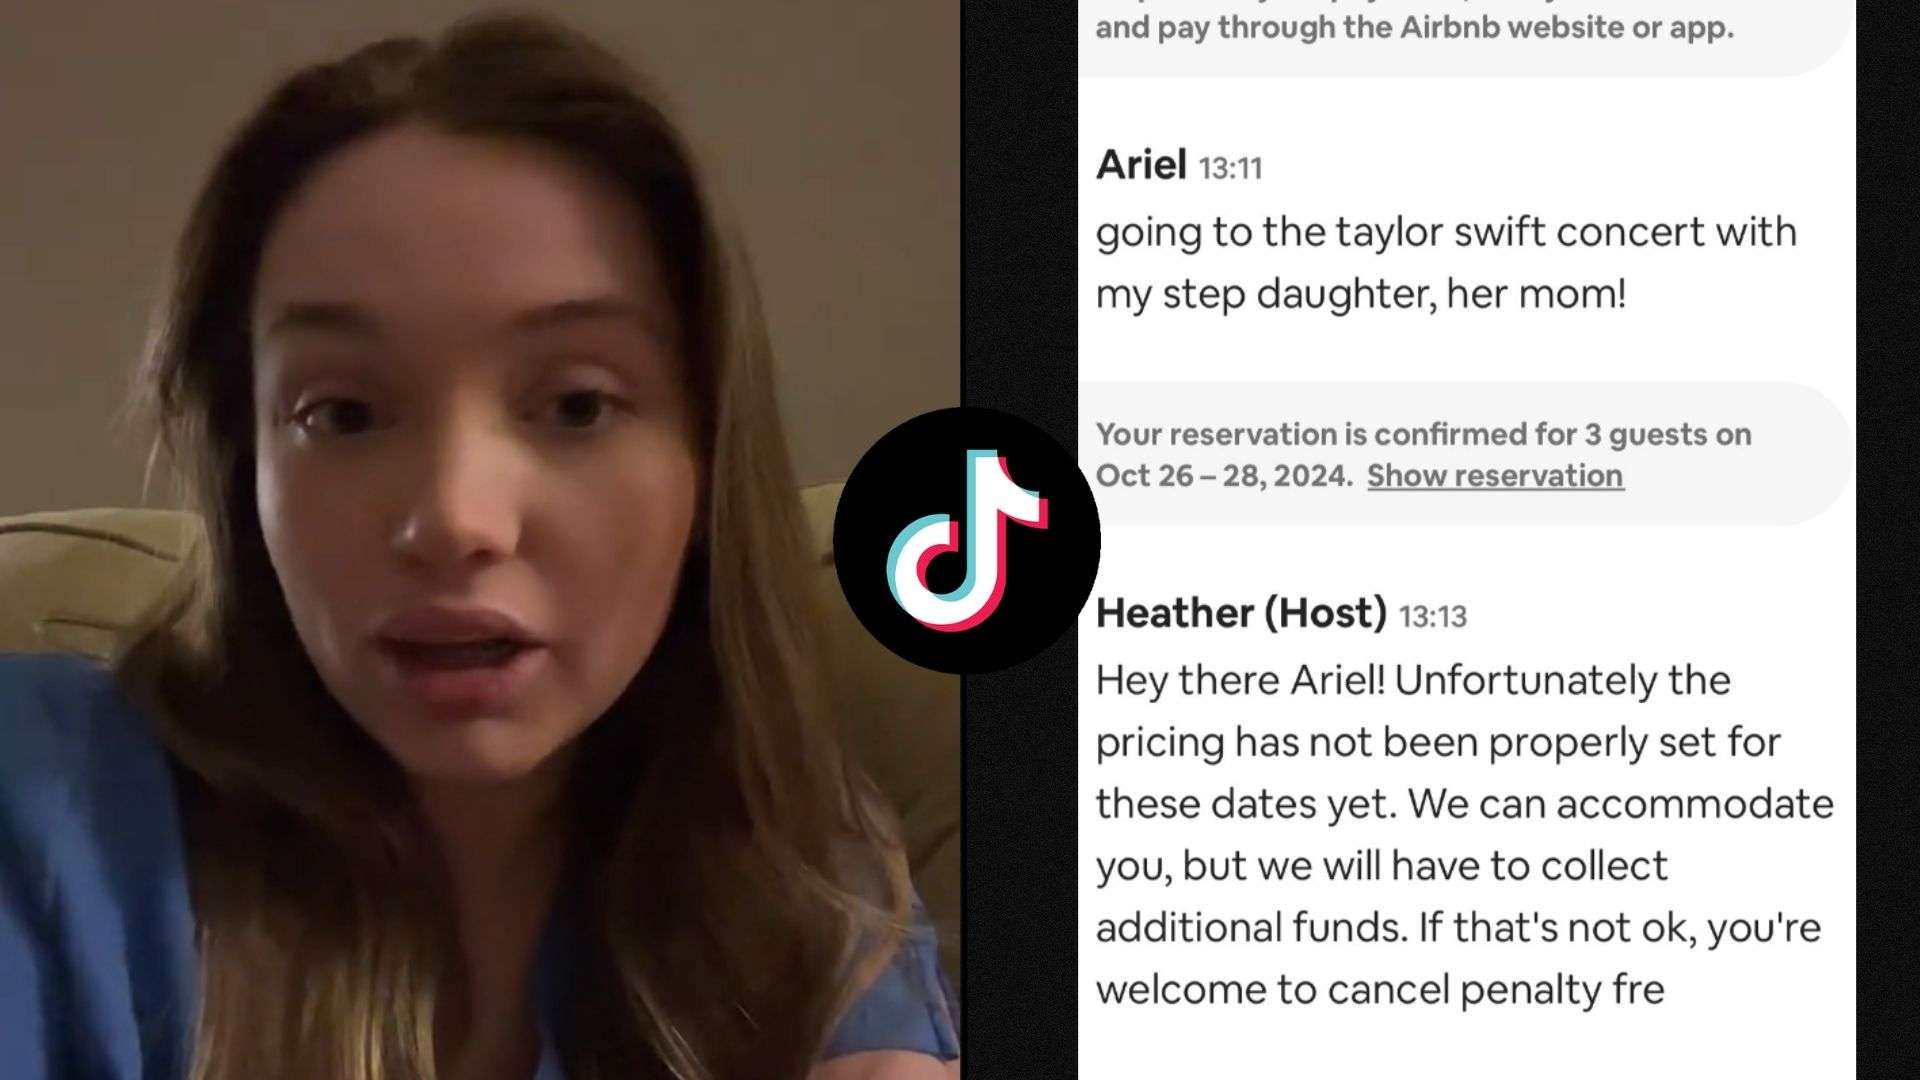 Woman next to airbnb messages about booking for taylor swift concert